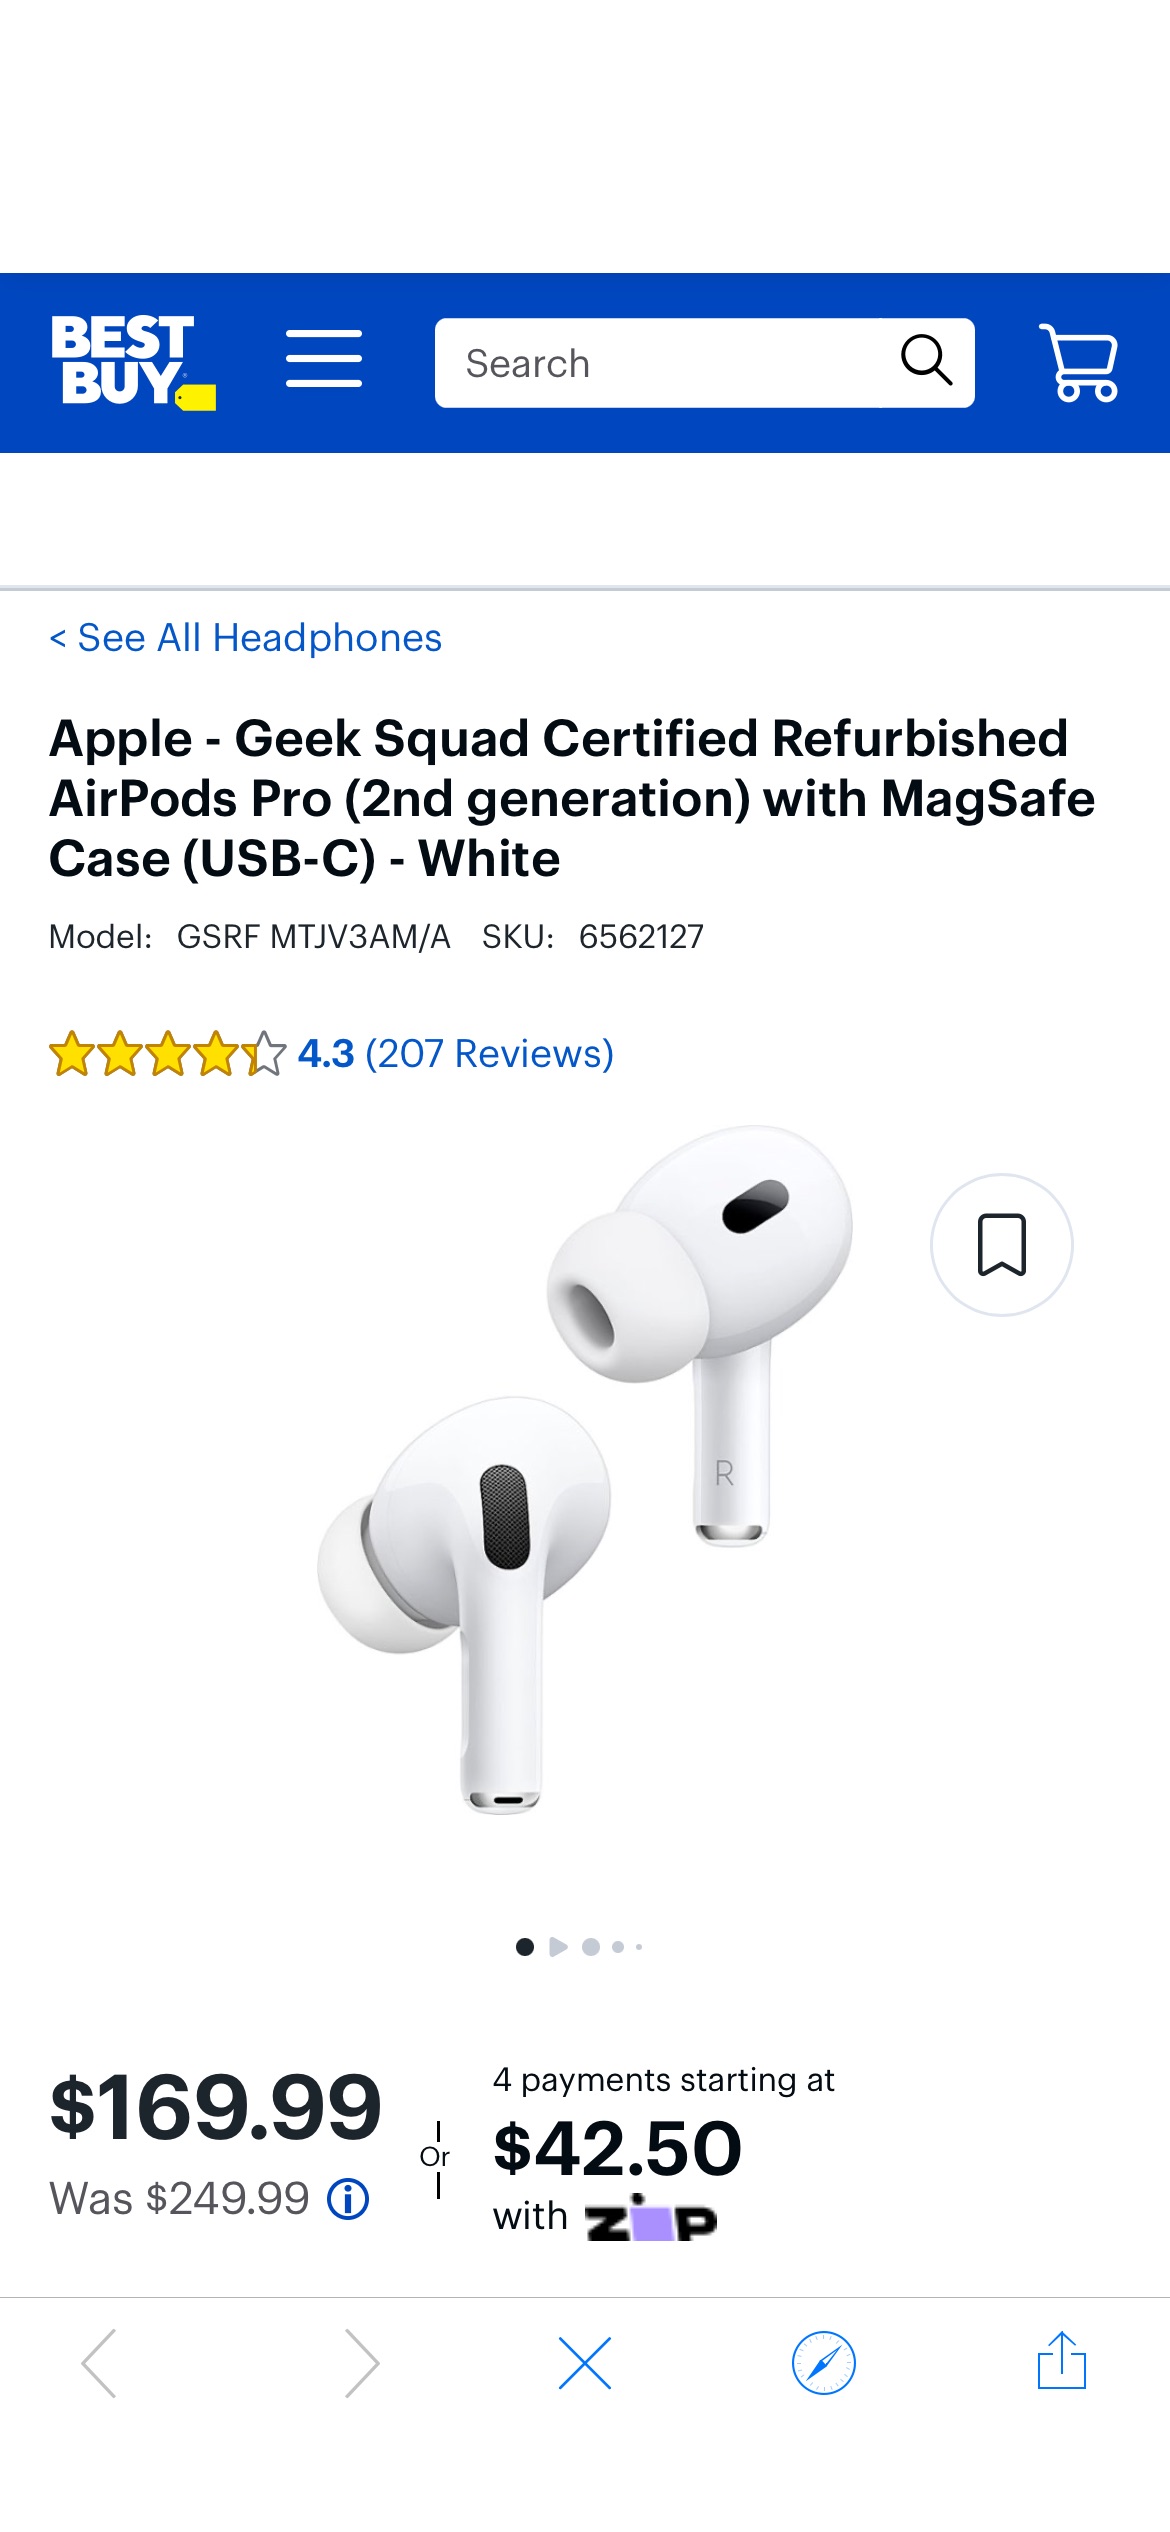 Apple Geek Squad Certified Refurbished AirPods Pro (2nd generation) with MagSafe Case (USB‑C) White GSRF MTJV3AM/A - Best Buy